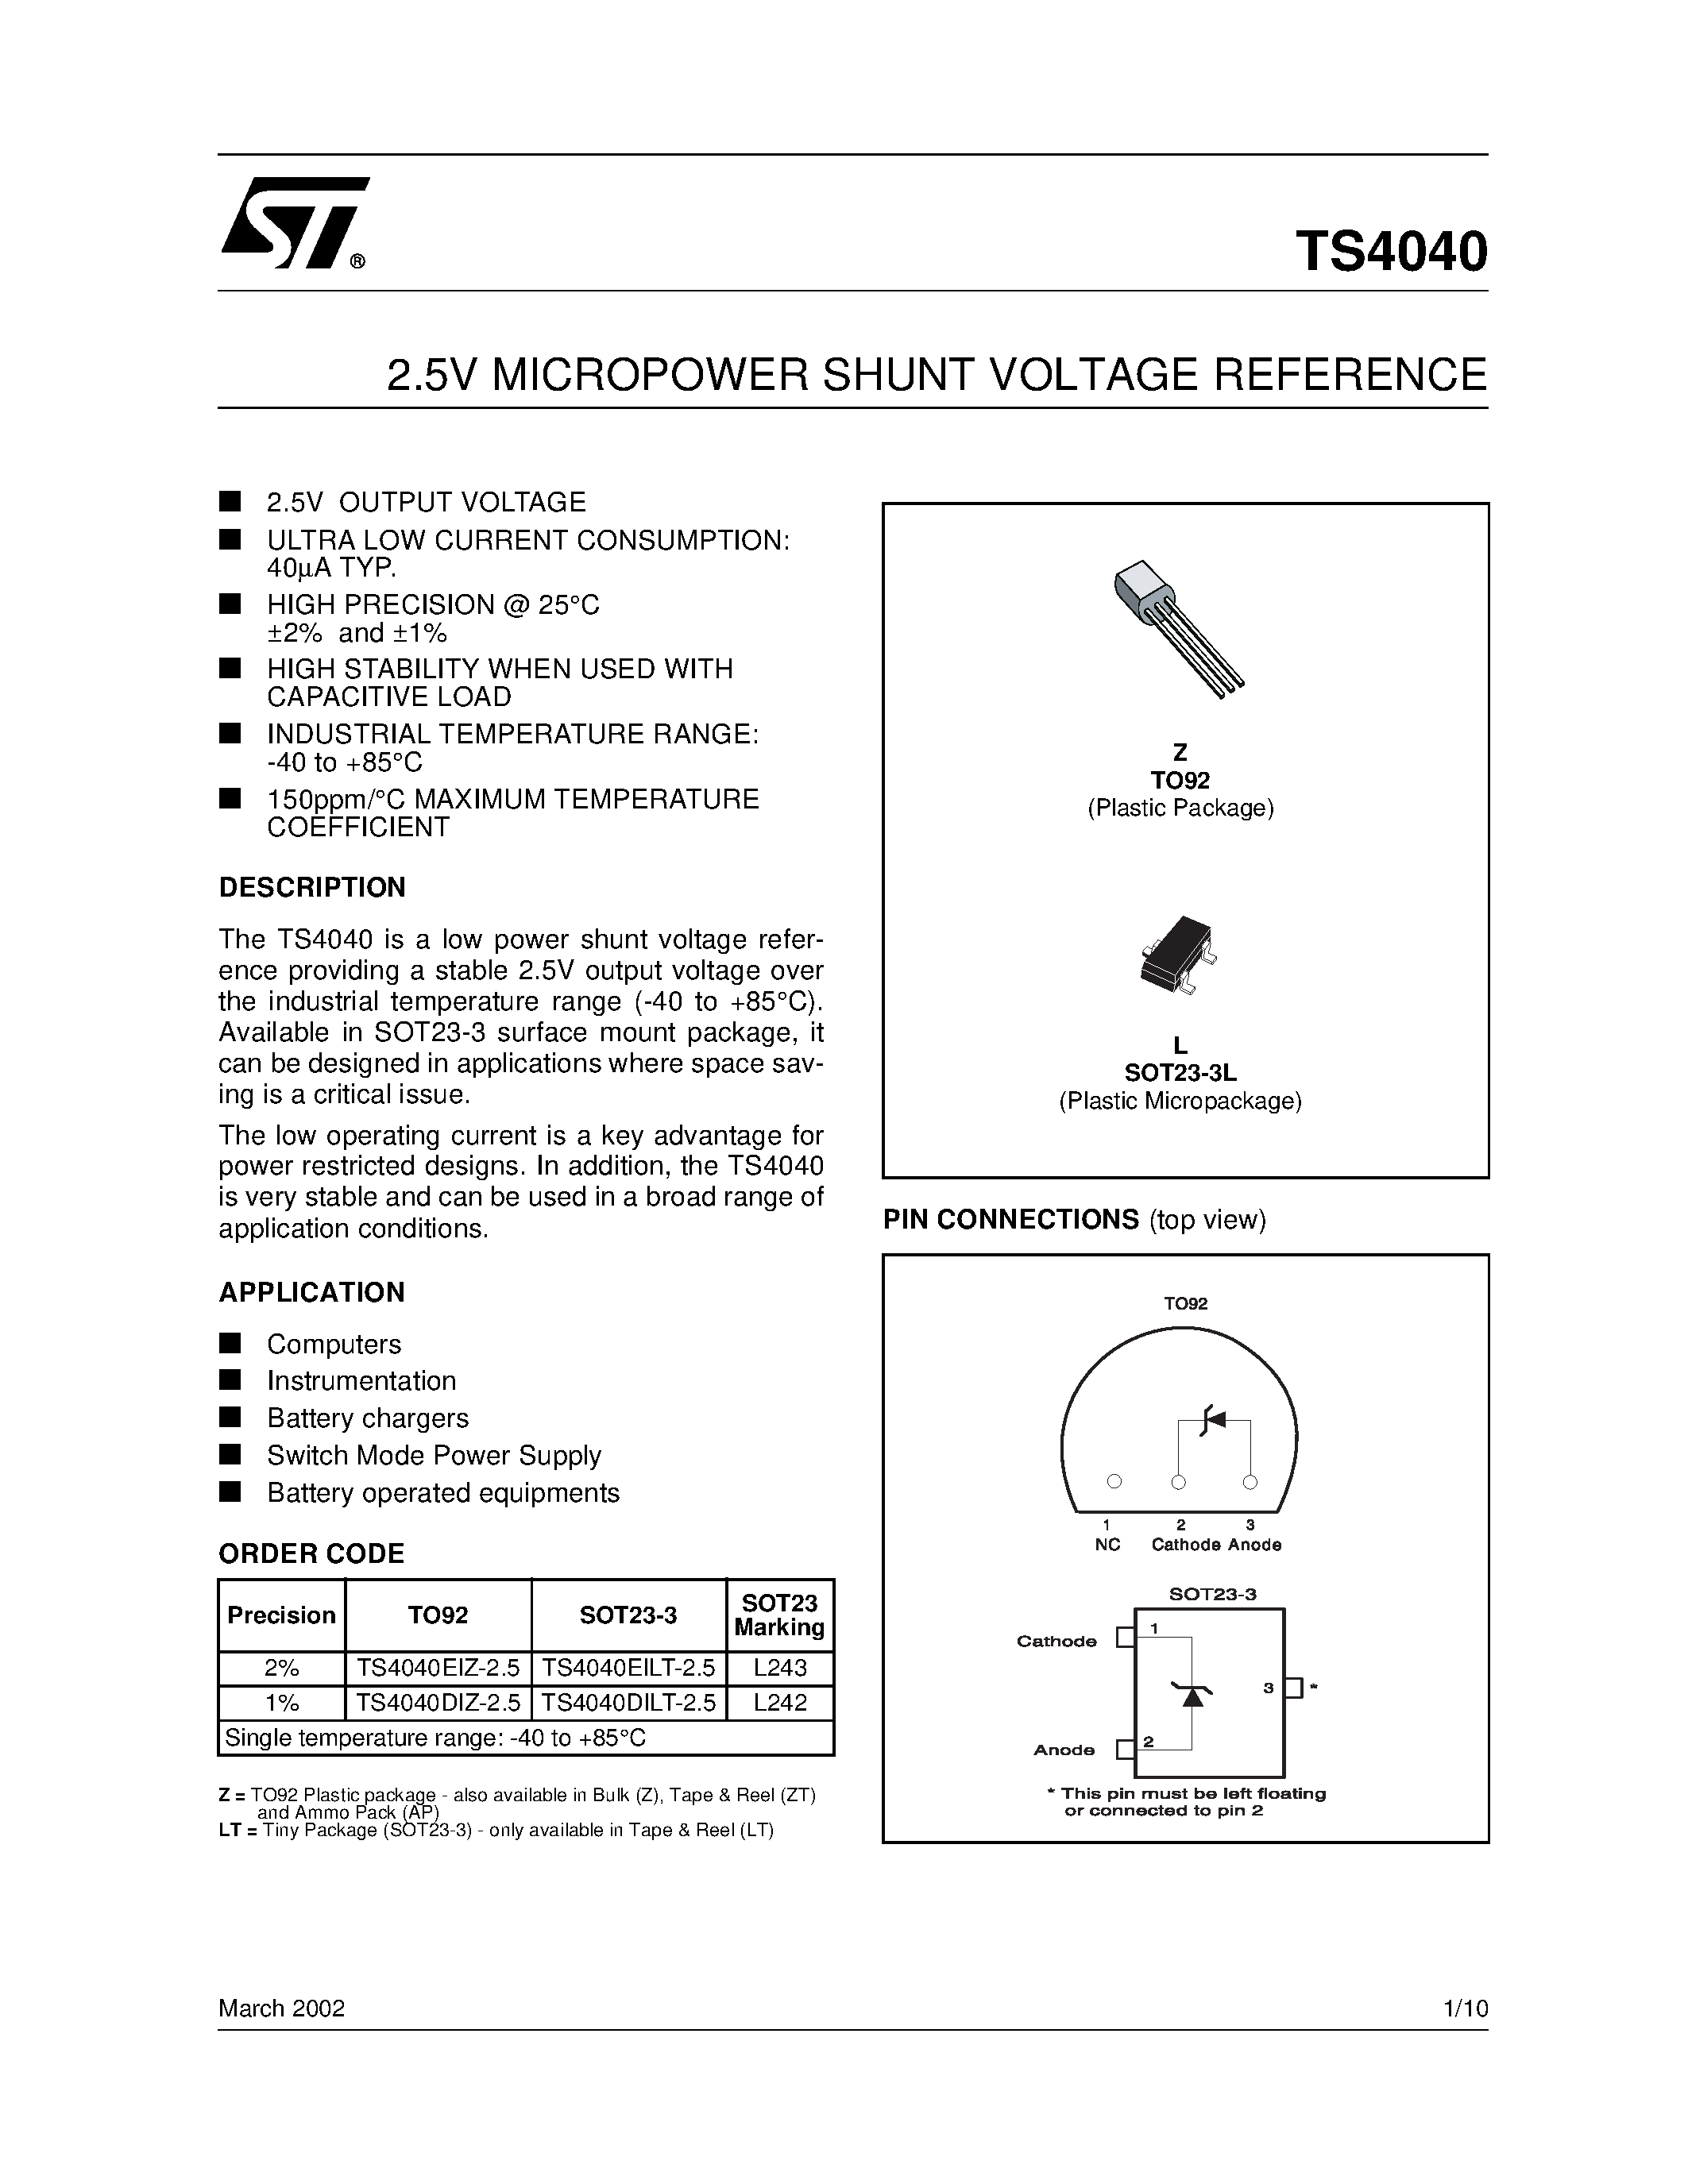 Datasheet TS4040 - 2.5V MICROPOWER SHUNT VOLTAGE REFERENCE page 1